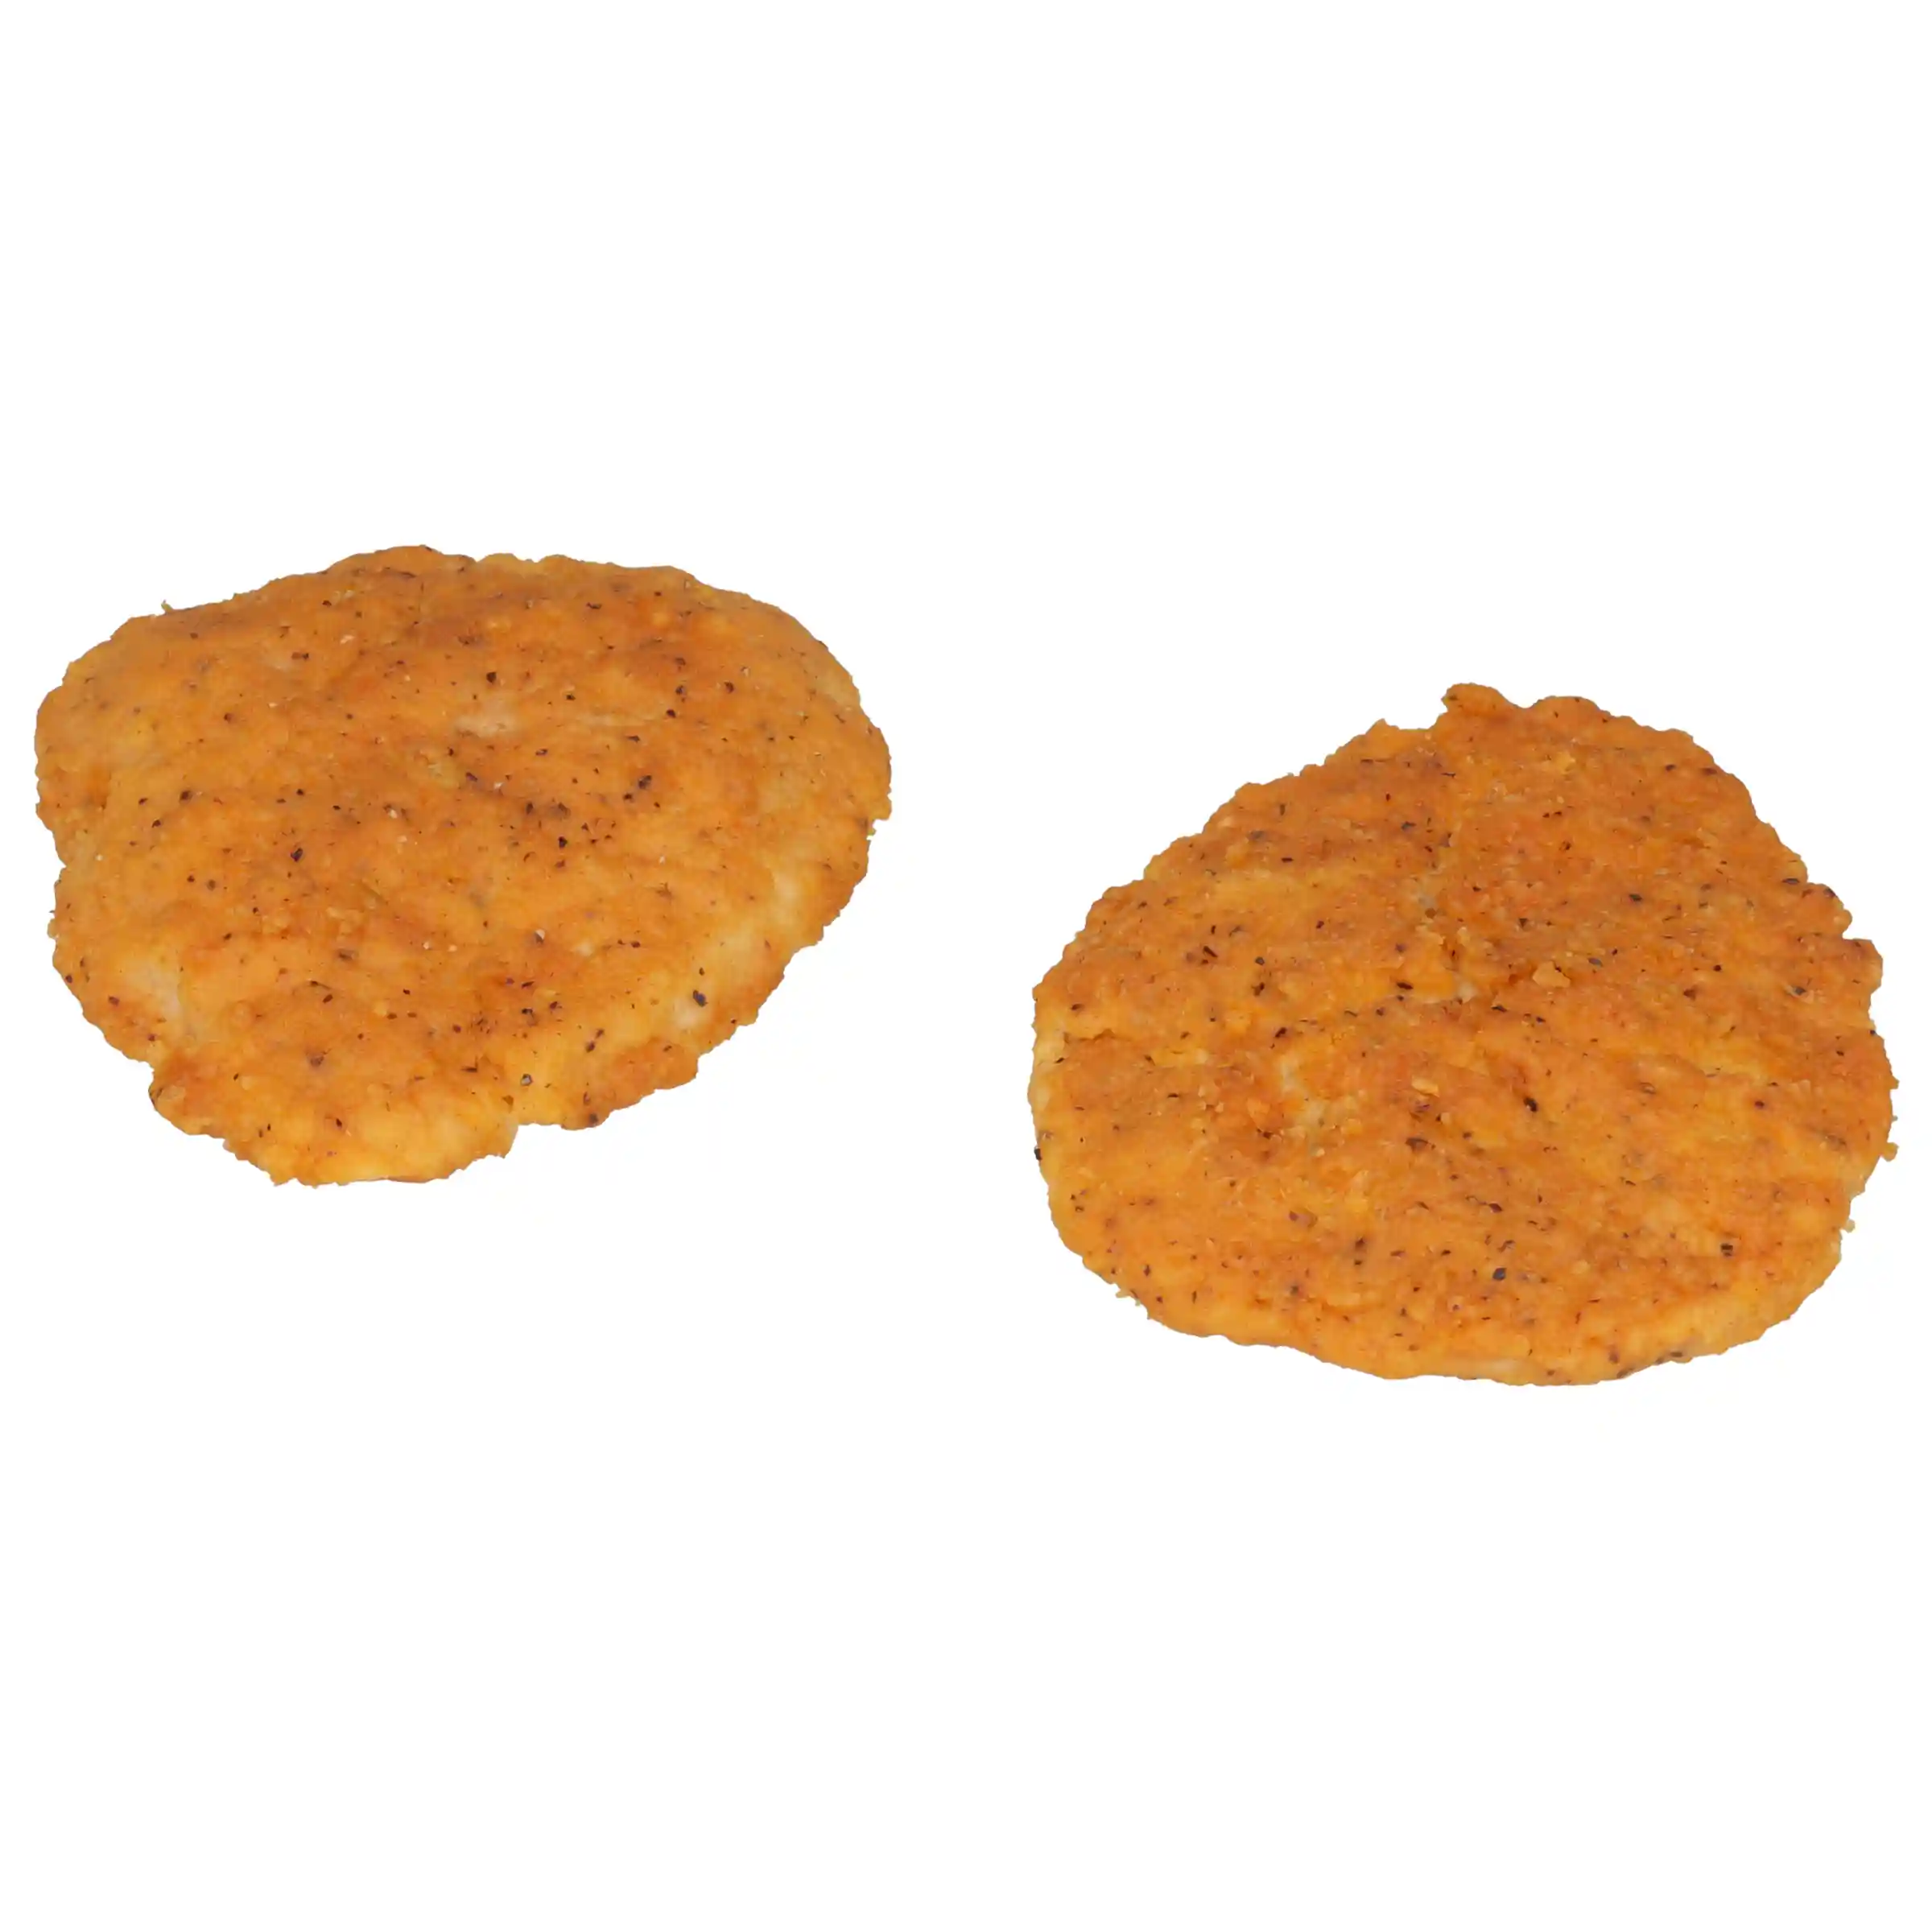 Tyson Red Label® Uncooked Hot & Spicy Select Cut Chicken Breast Filet Fritters, 4 oz. _image_11